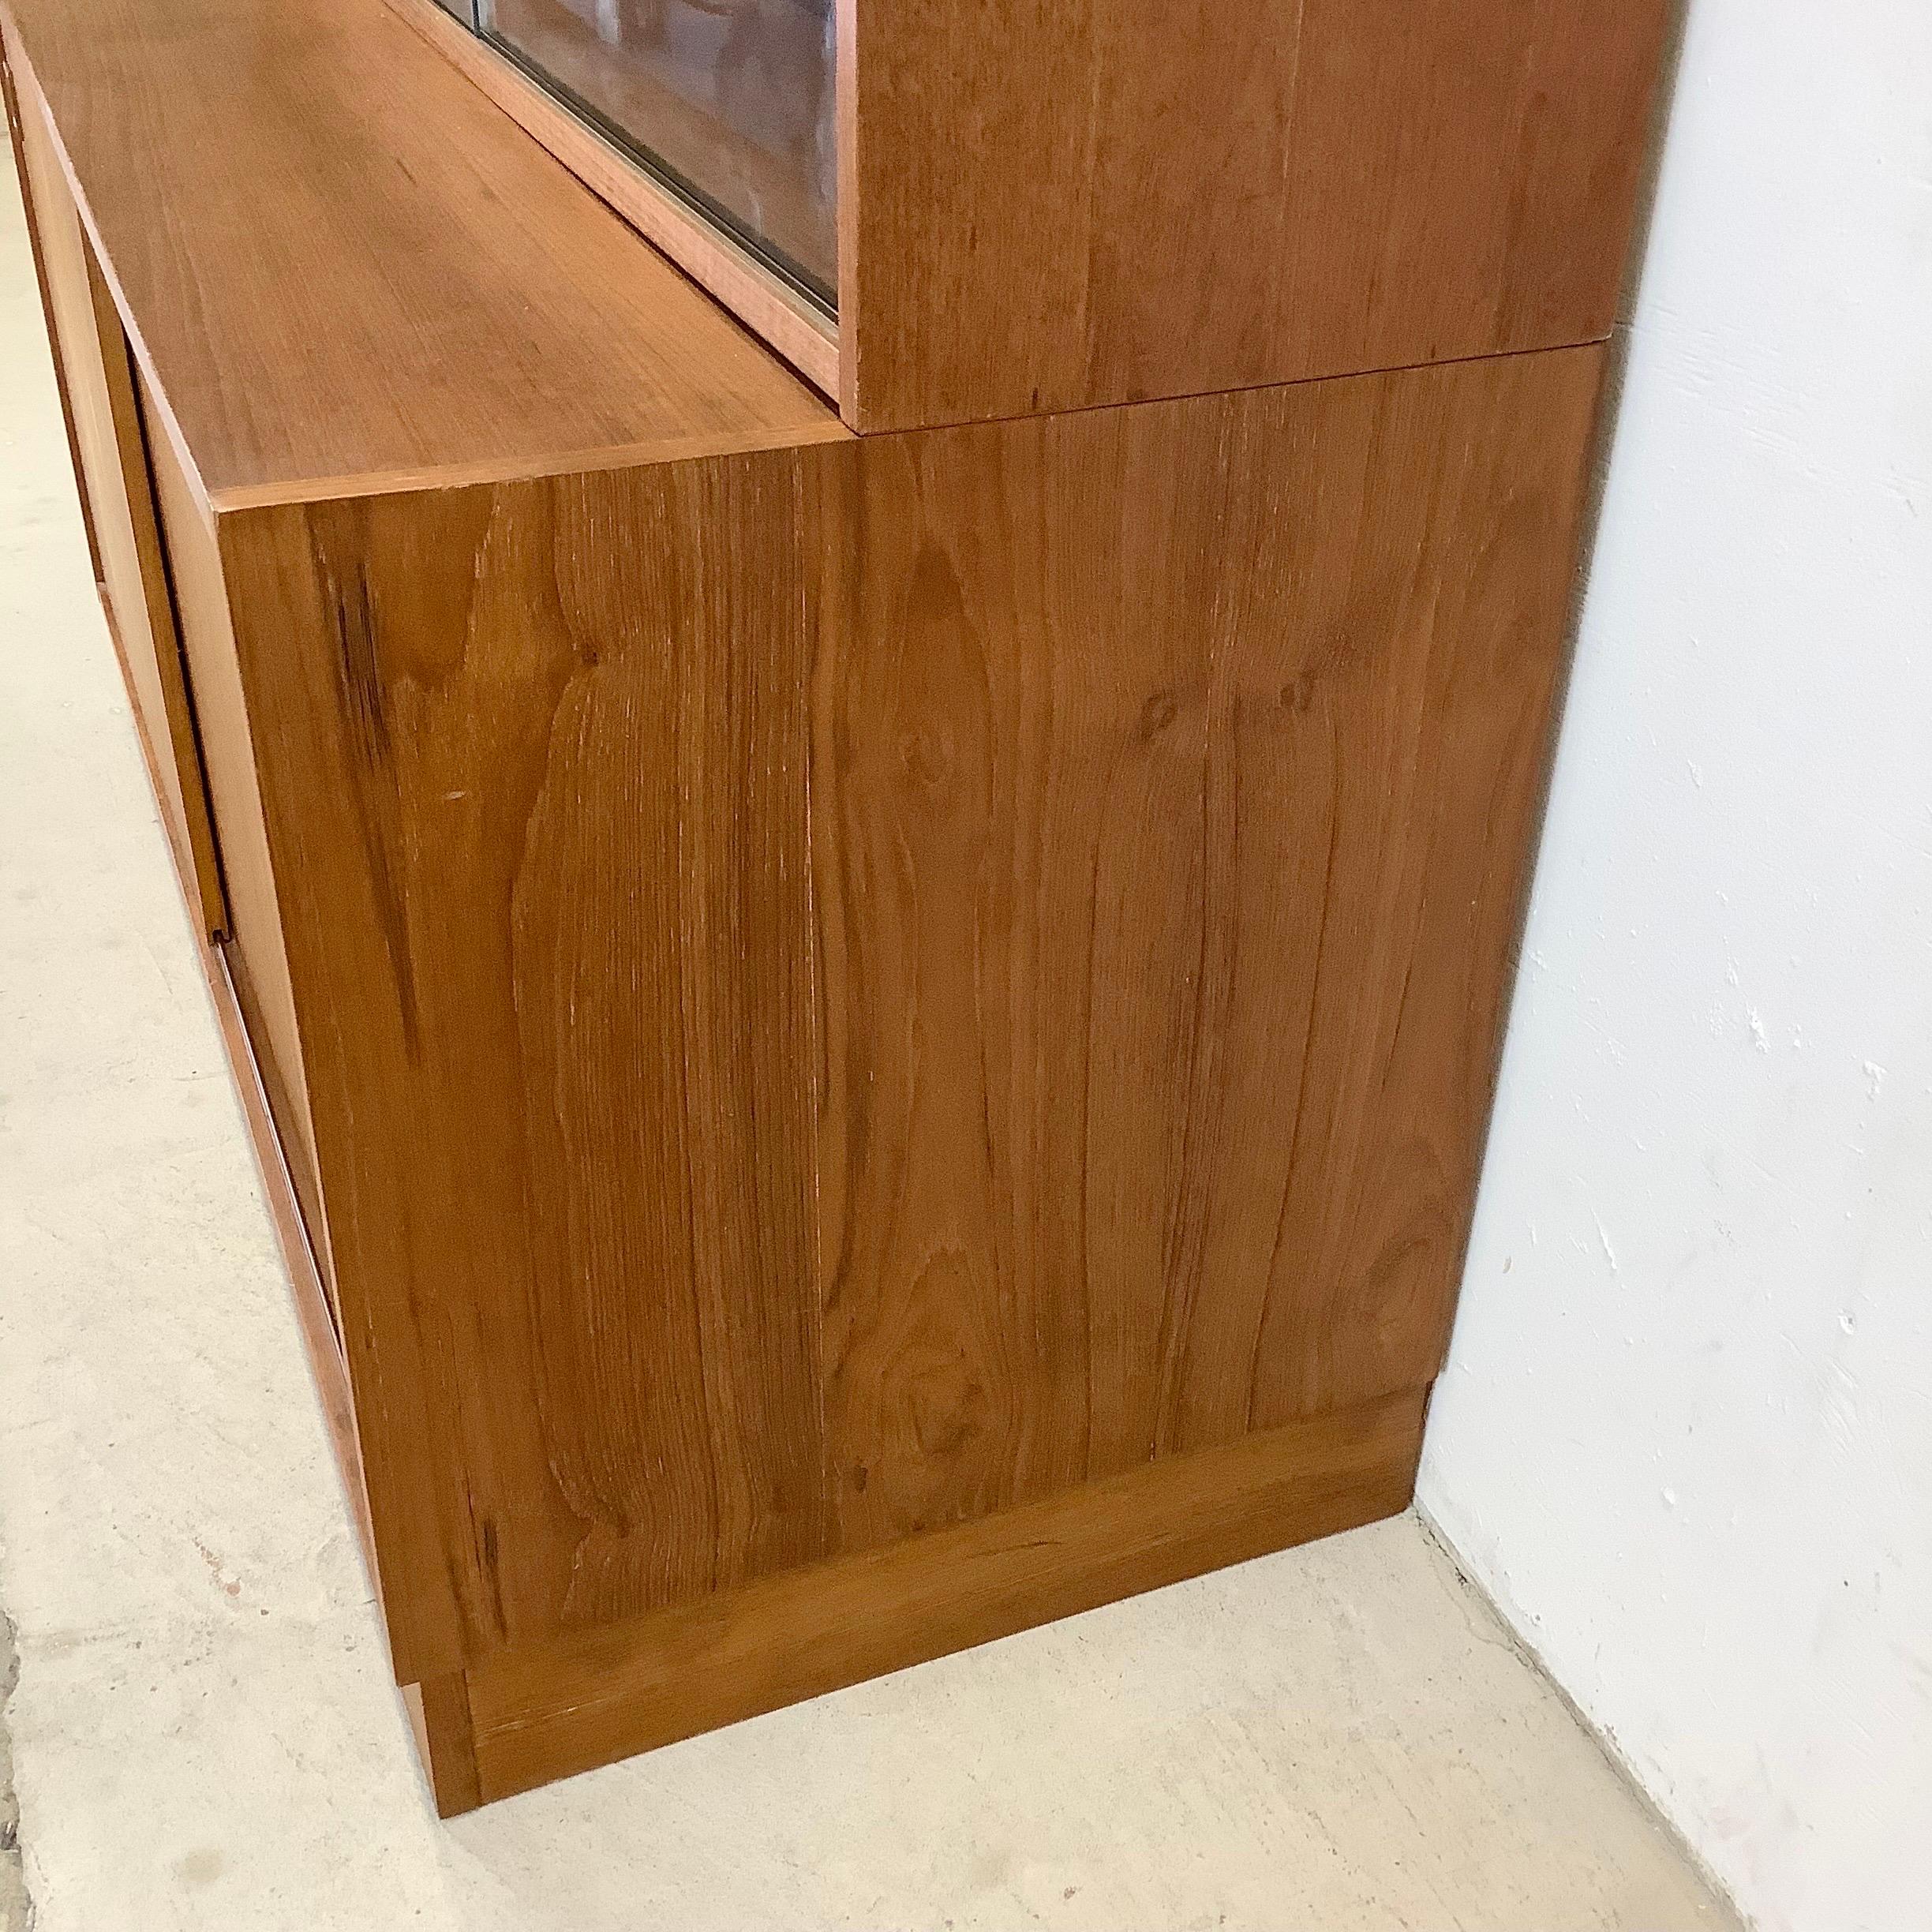 Mid-20th Century Modern Teak Bookcase With Cabinet and Glass Sliding Doors For Sale